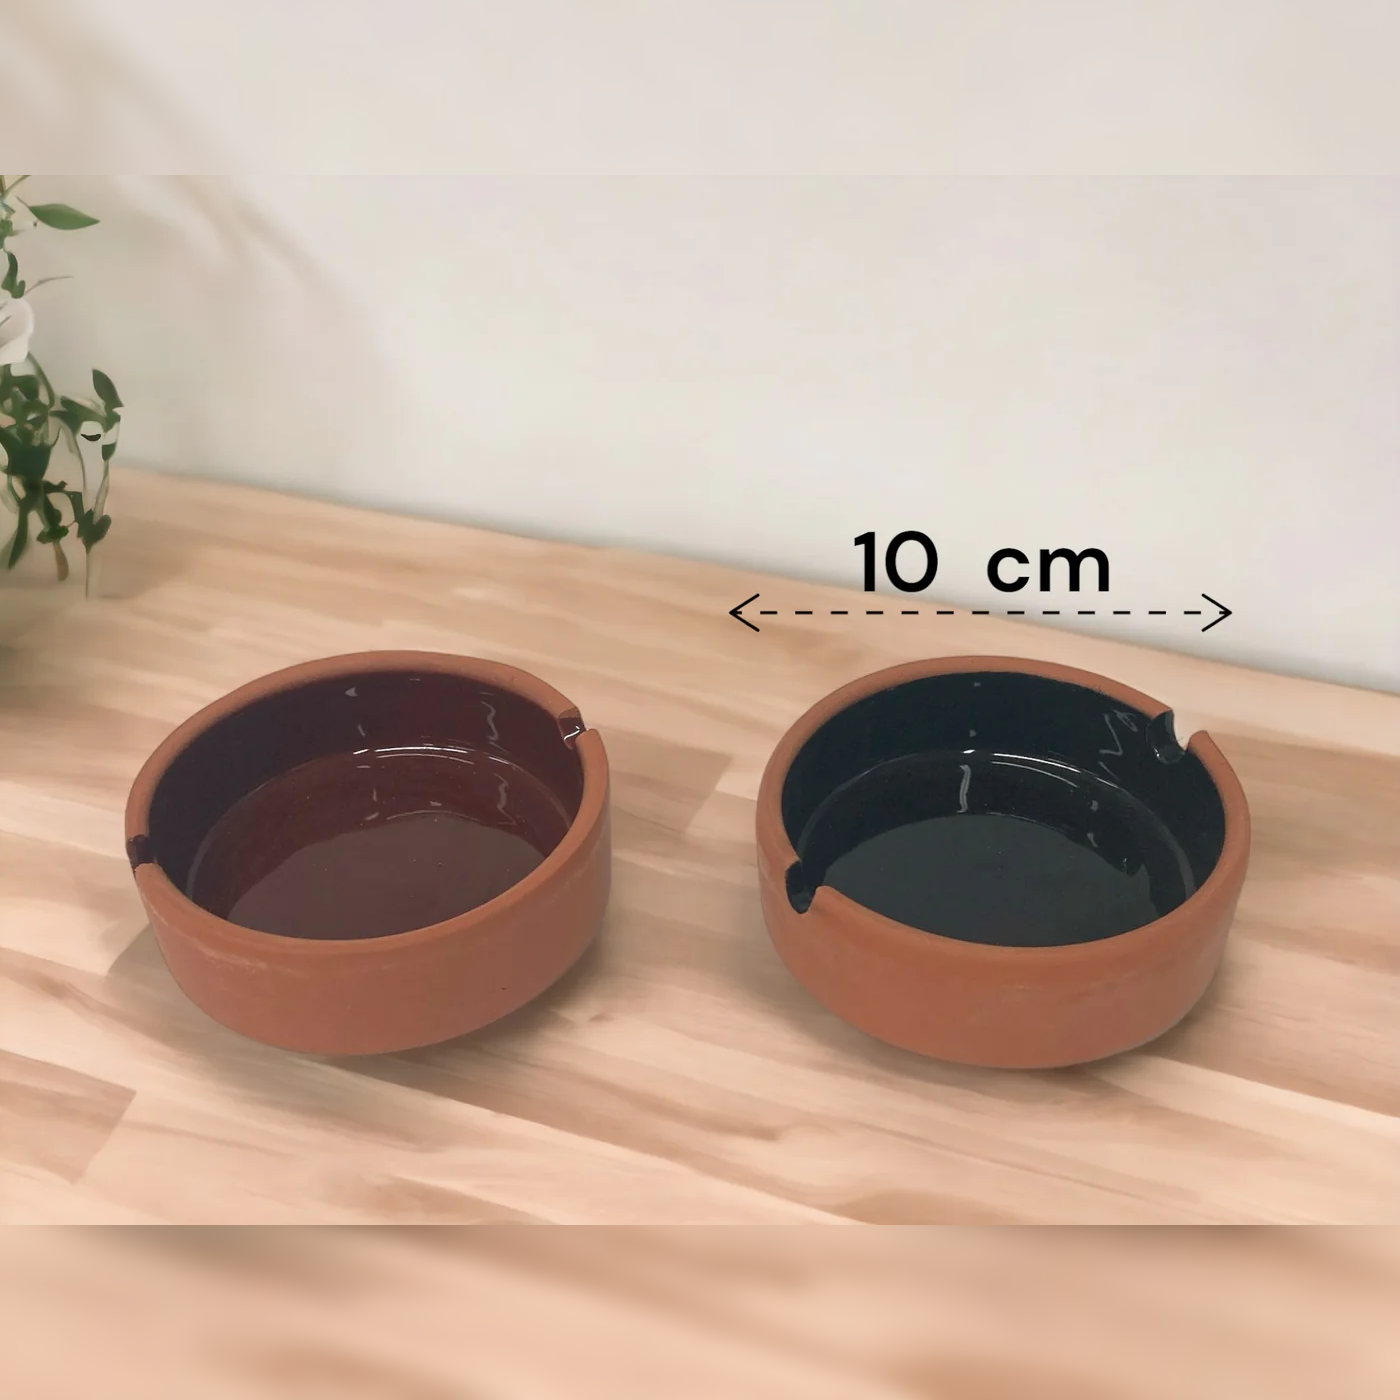 Natural Terracotta Ashtray 10 cm with Colored Glazing - Lunaz Shop